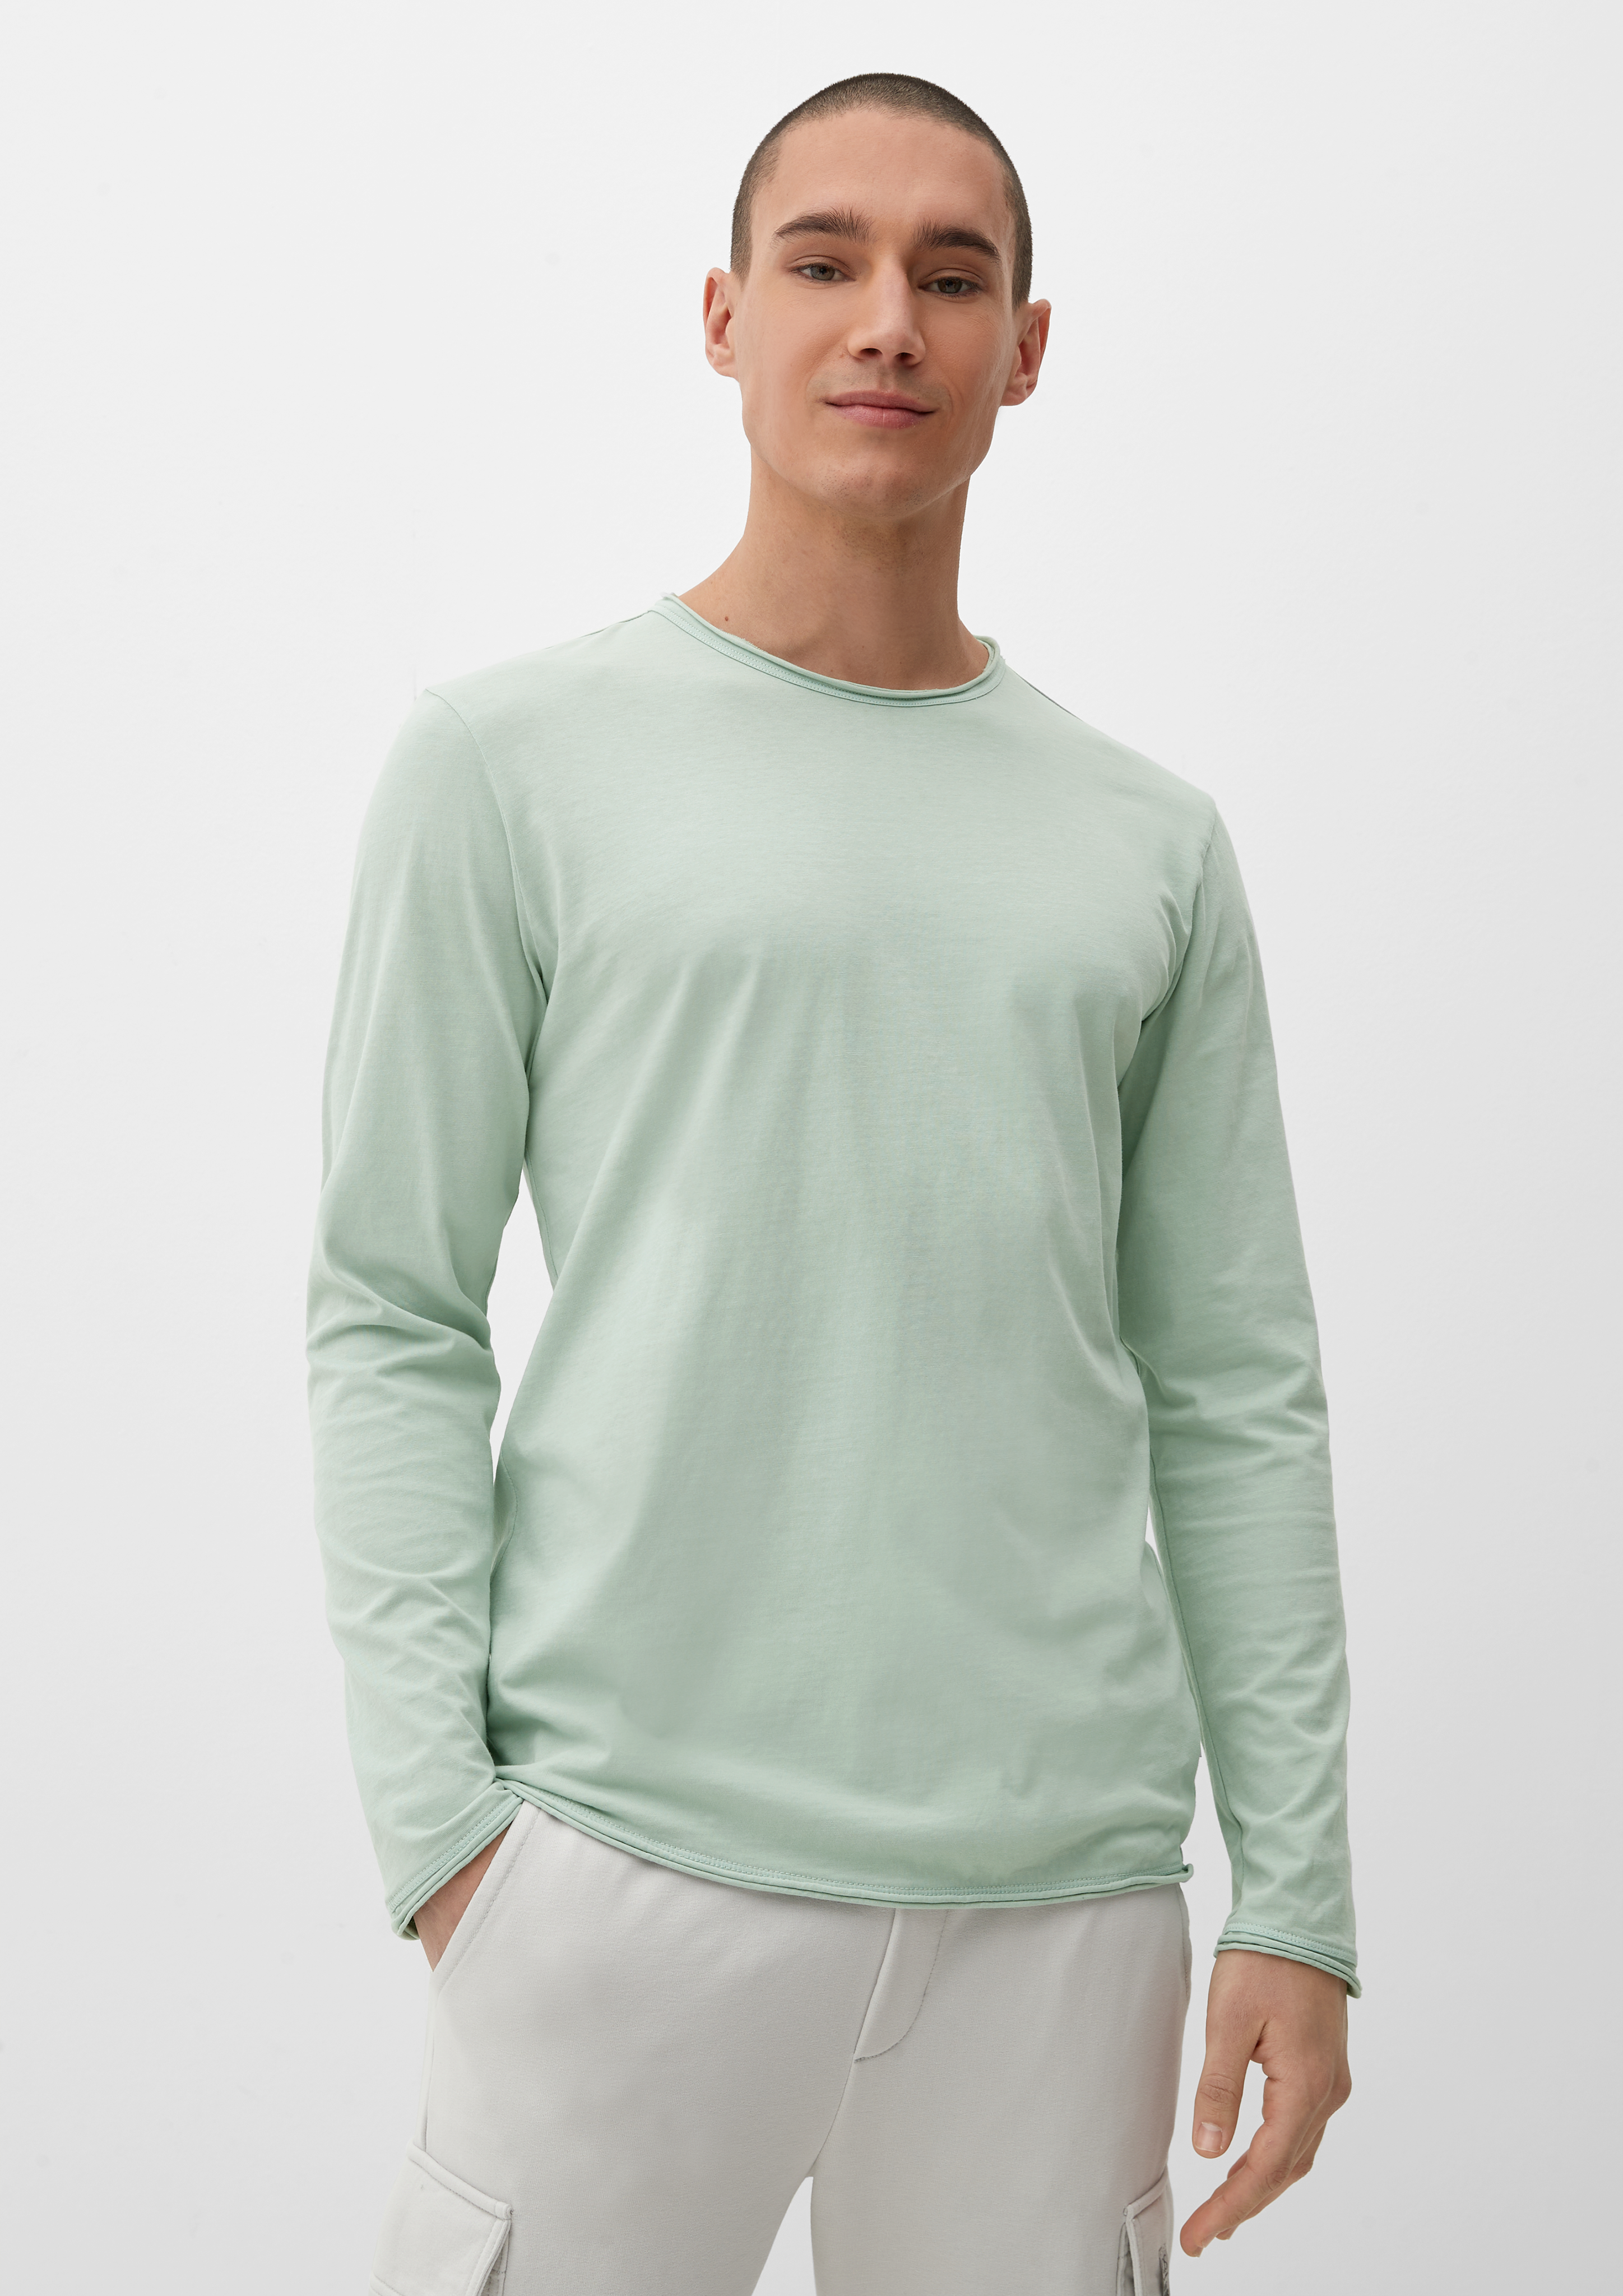 rolled sleeve - Long hem sage with a green top